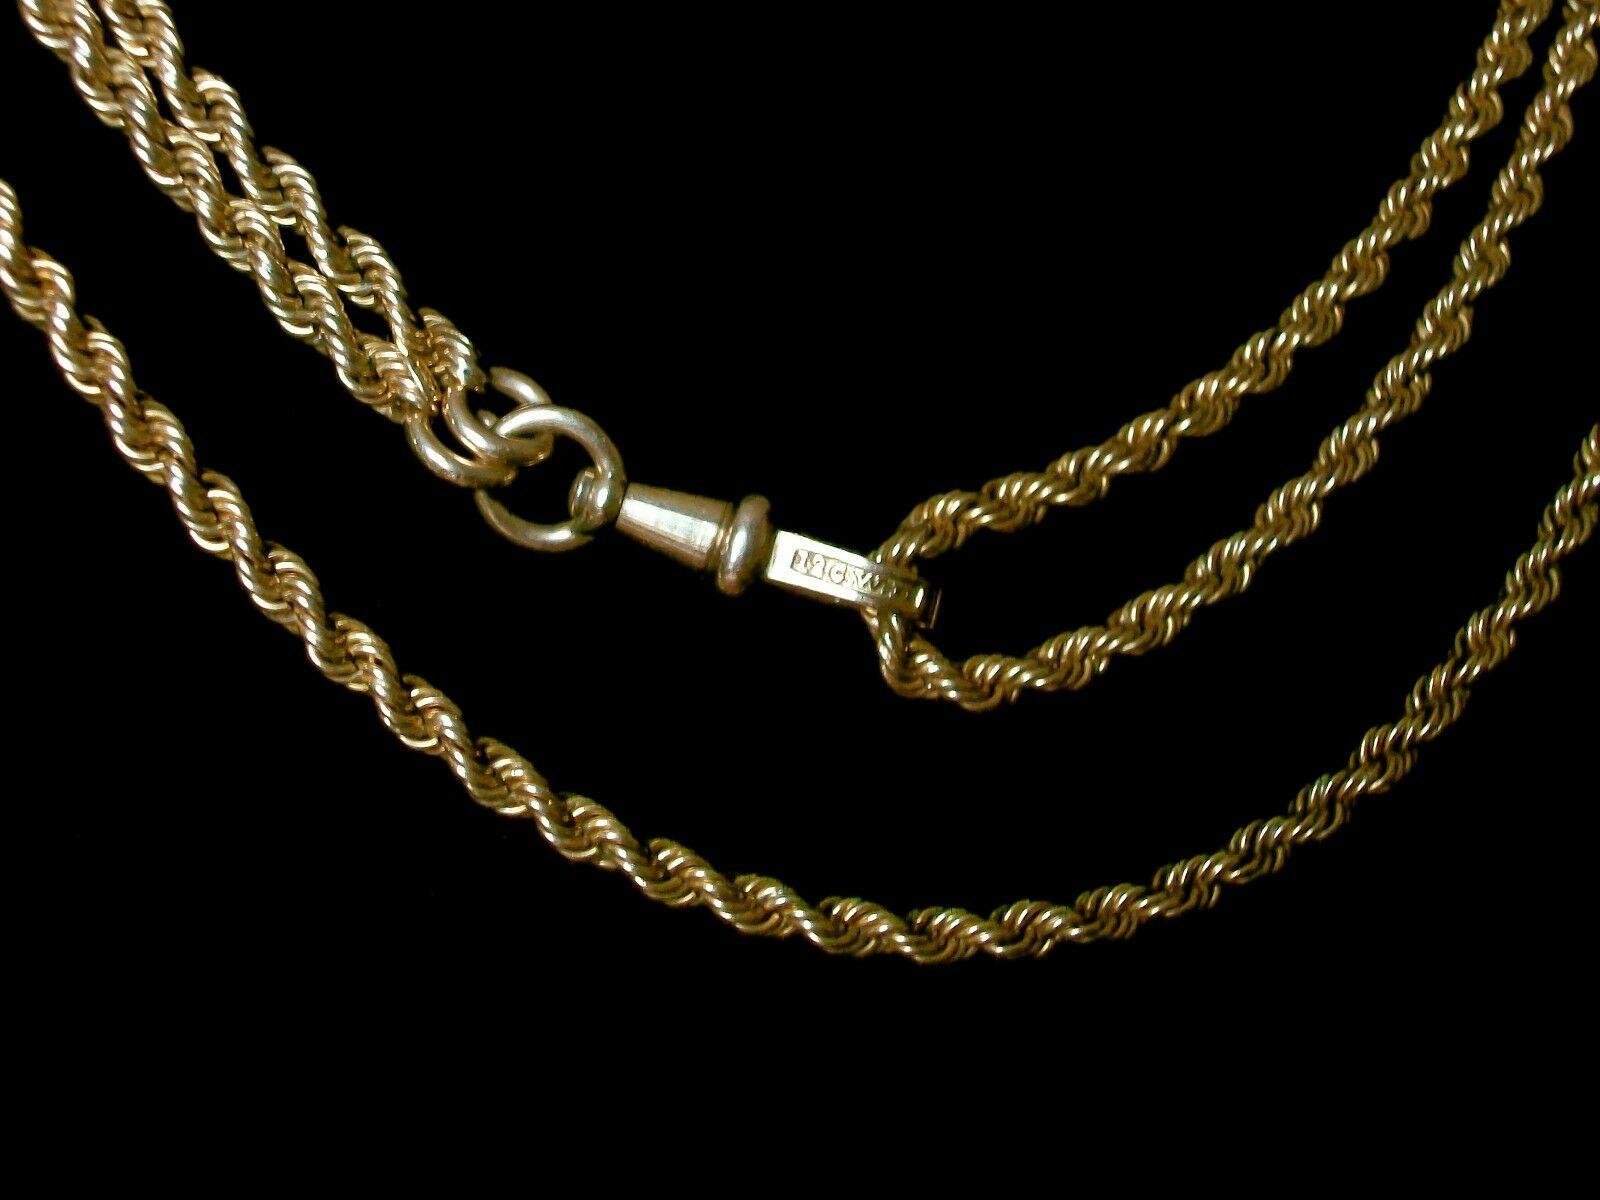 Victorian Gold Rope Twist Pocket Watch Chain / Necklace, U.S, circa 1880 For Sale 3